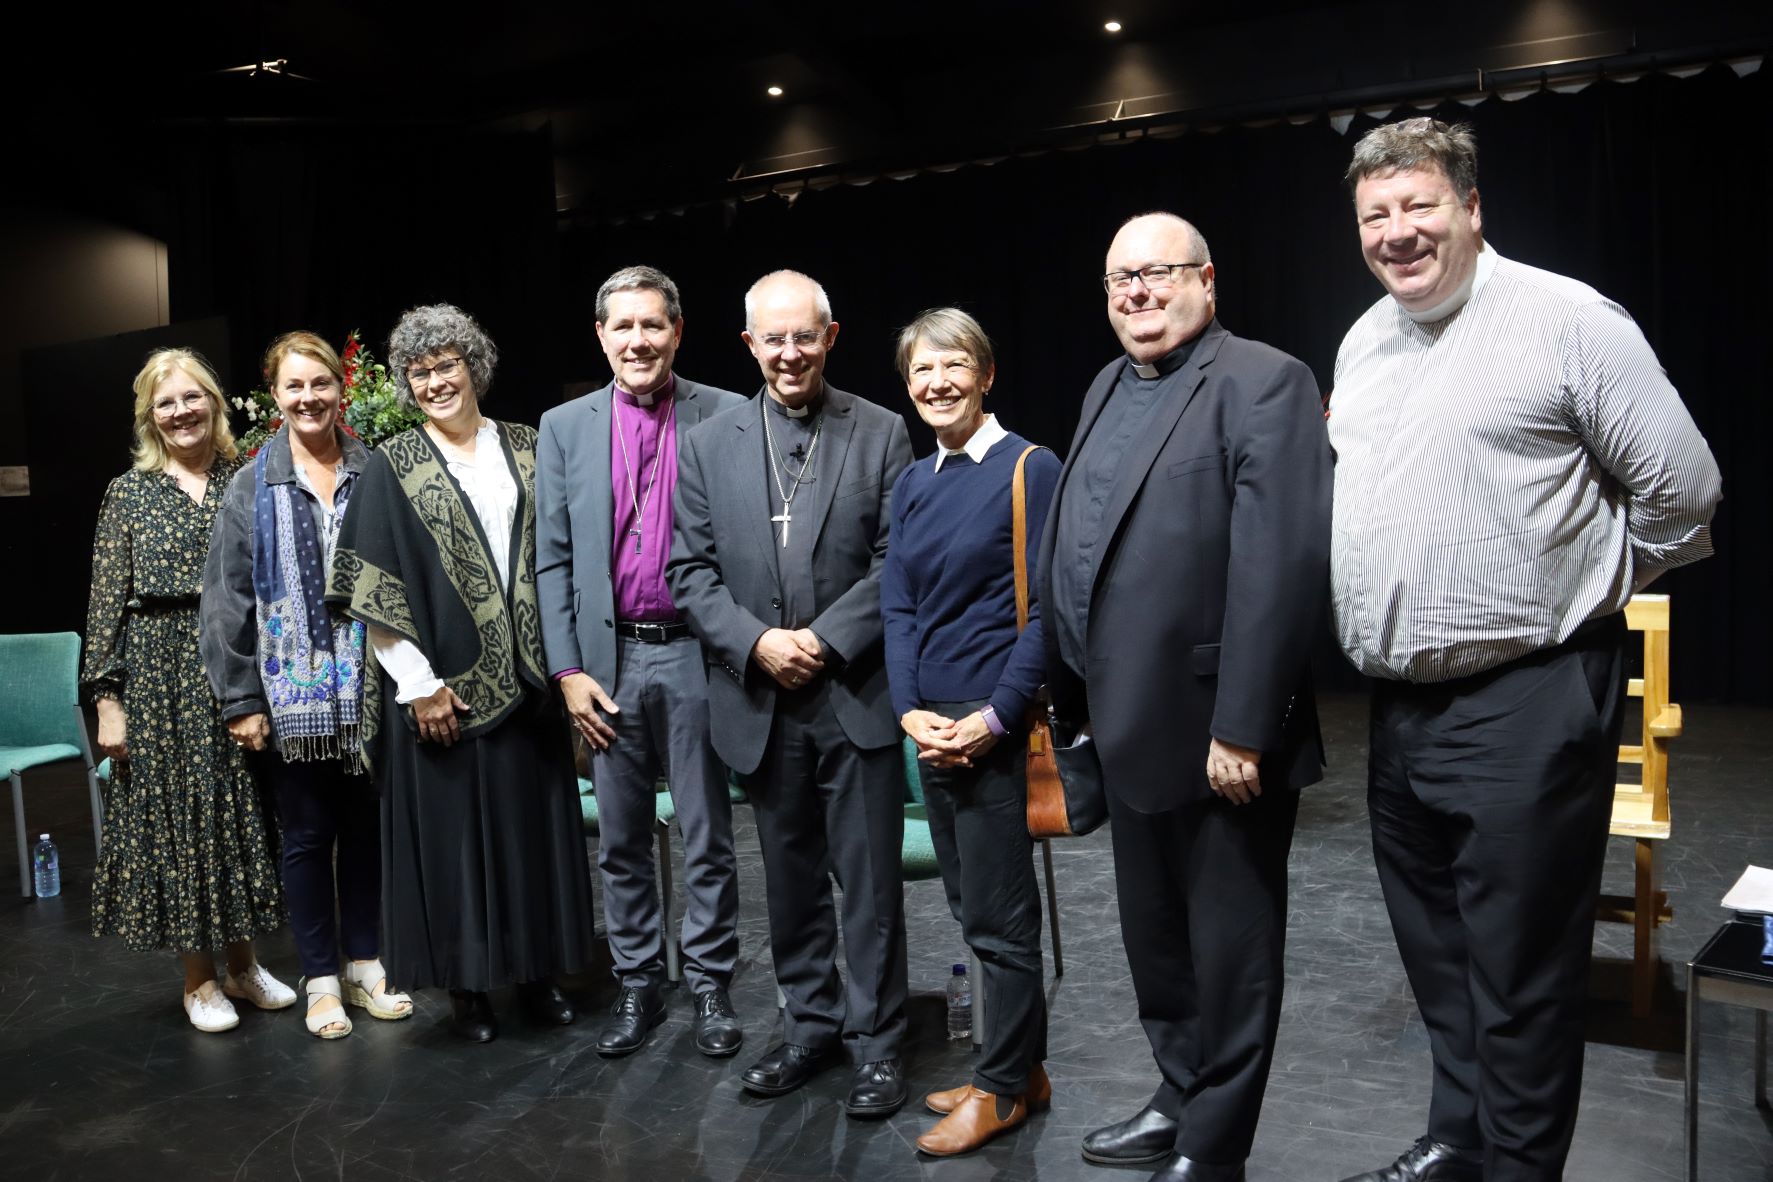 ACSQ clergy with Archbishop Justin Welby in Ballina in 2022